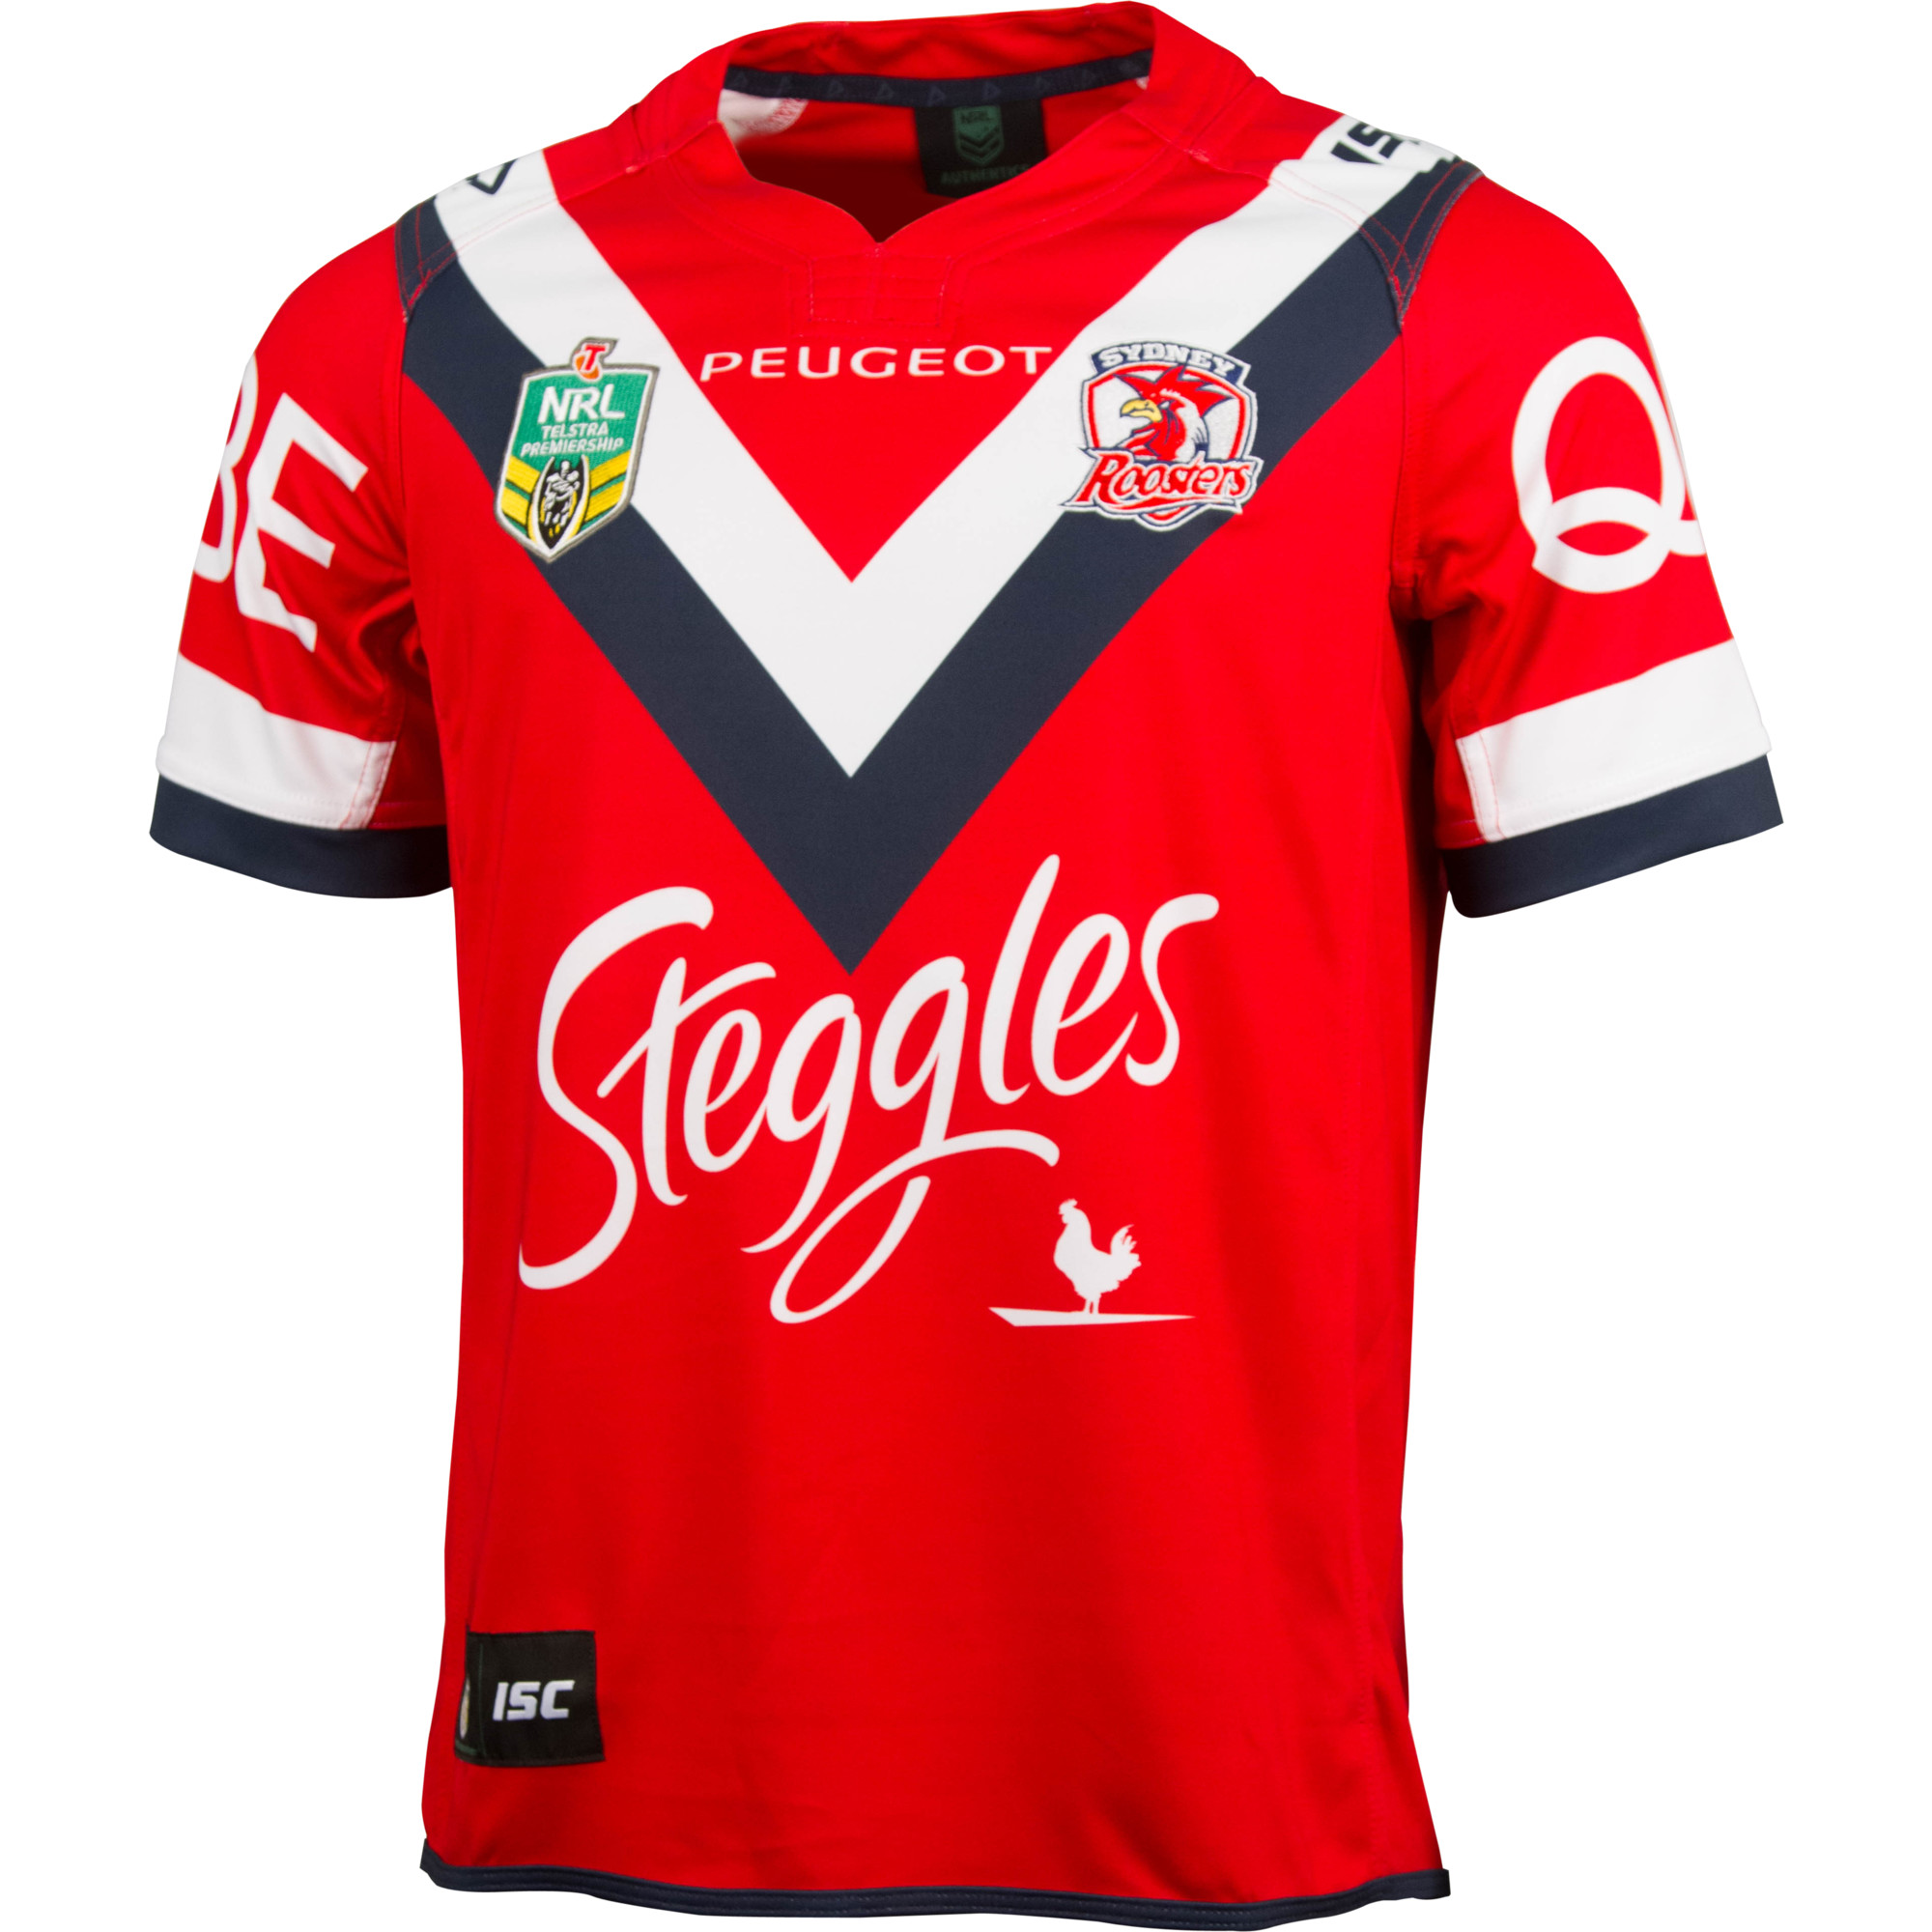 Images of Sydney Roosters | 2000x2000